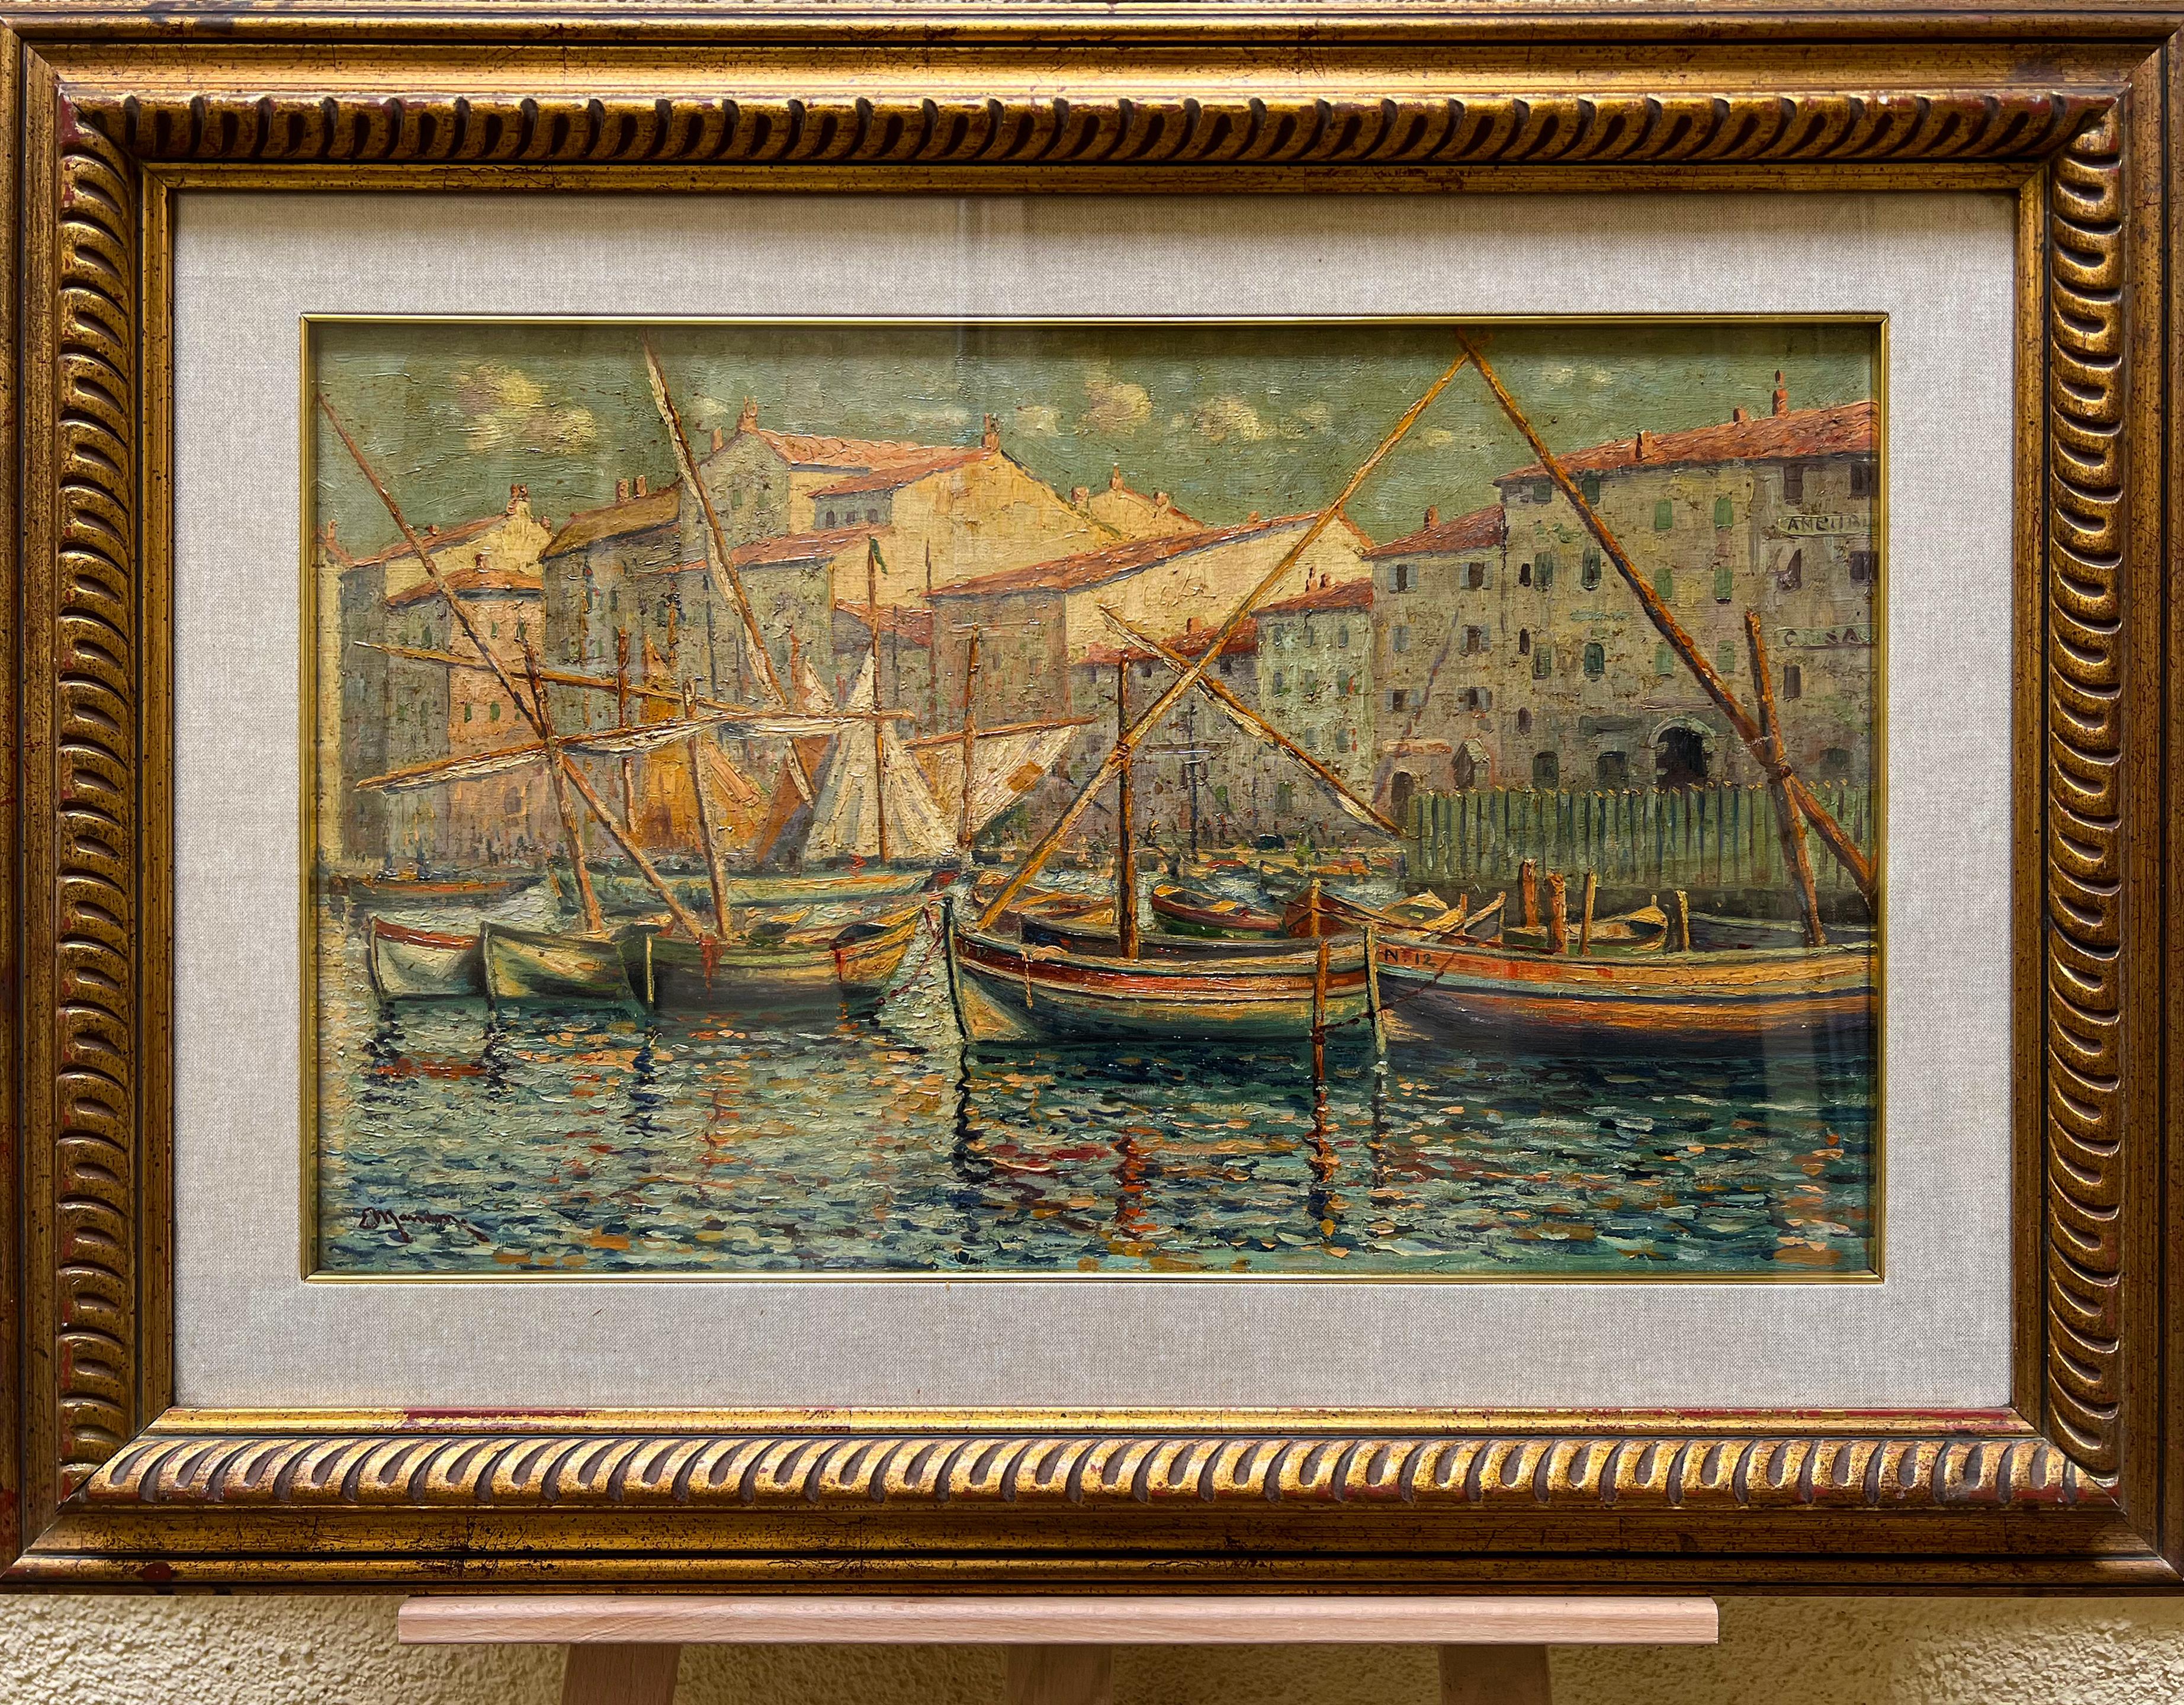 Boats in Portofino. The artist's signature is not legible but the painting shows an Impressionist influence in the luminous vibration of the water.
 